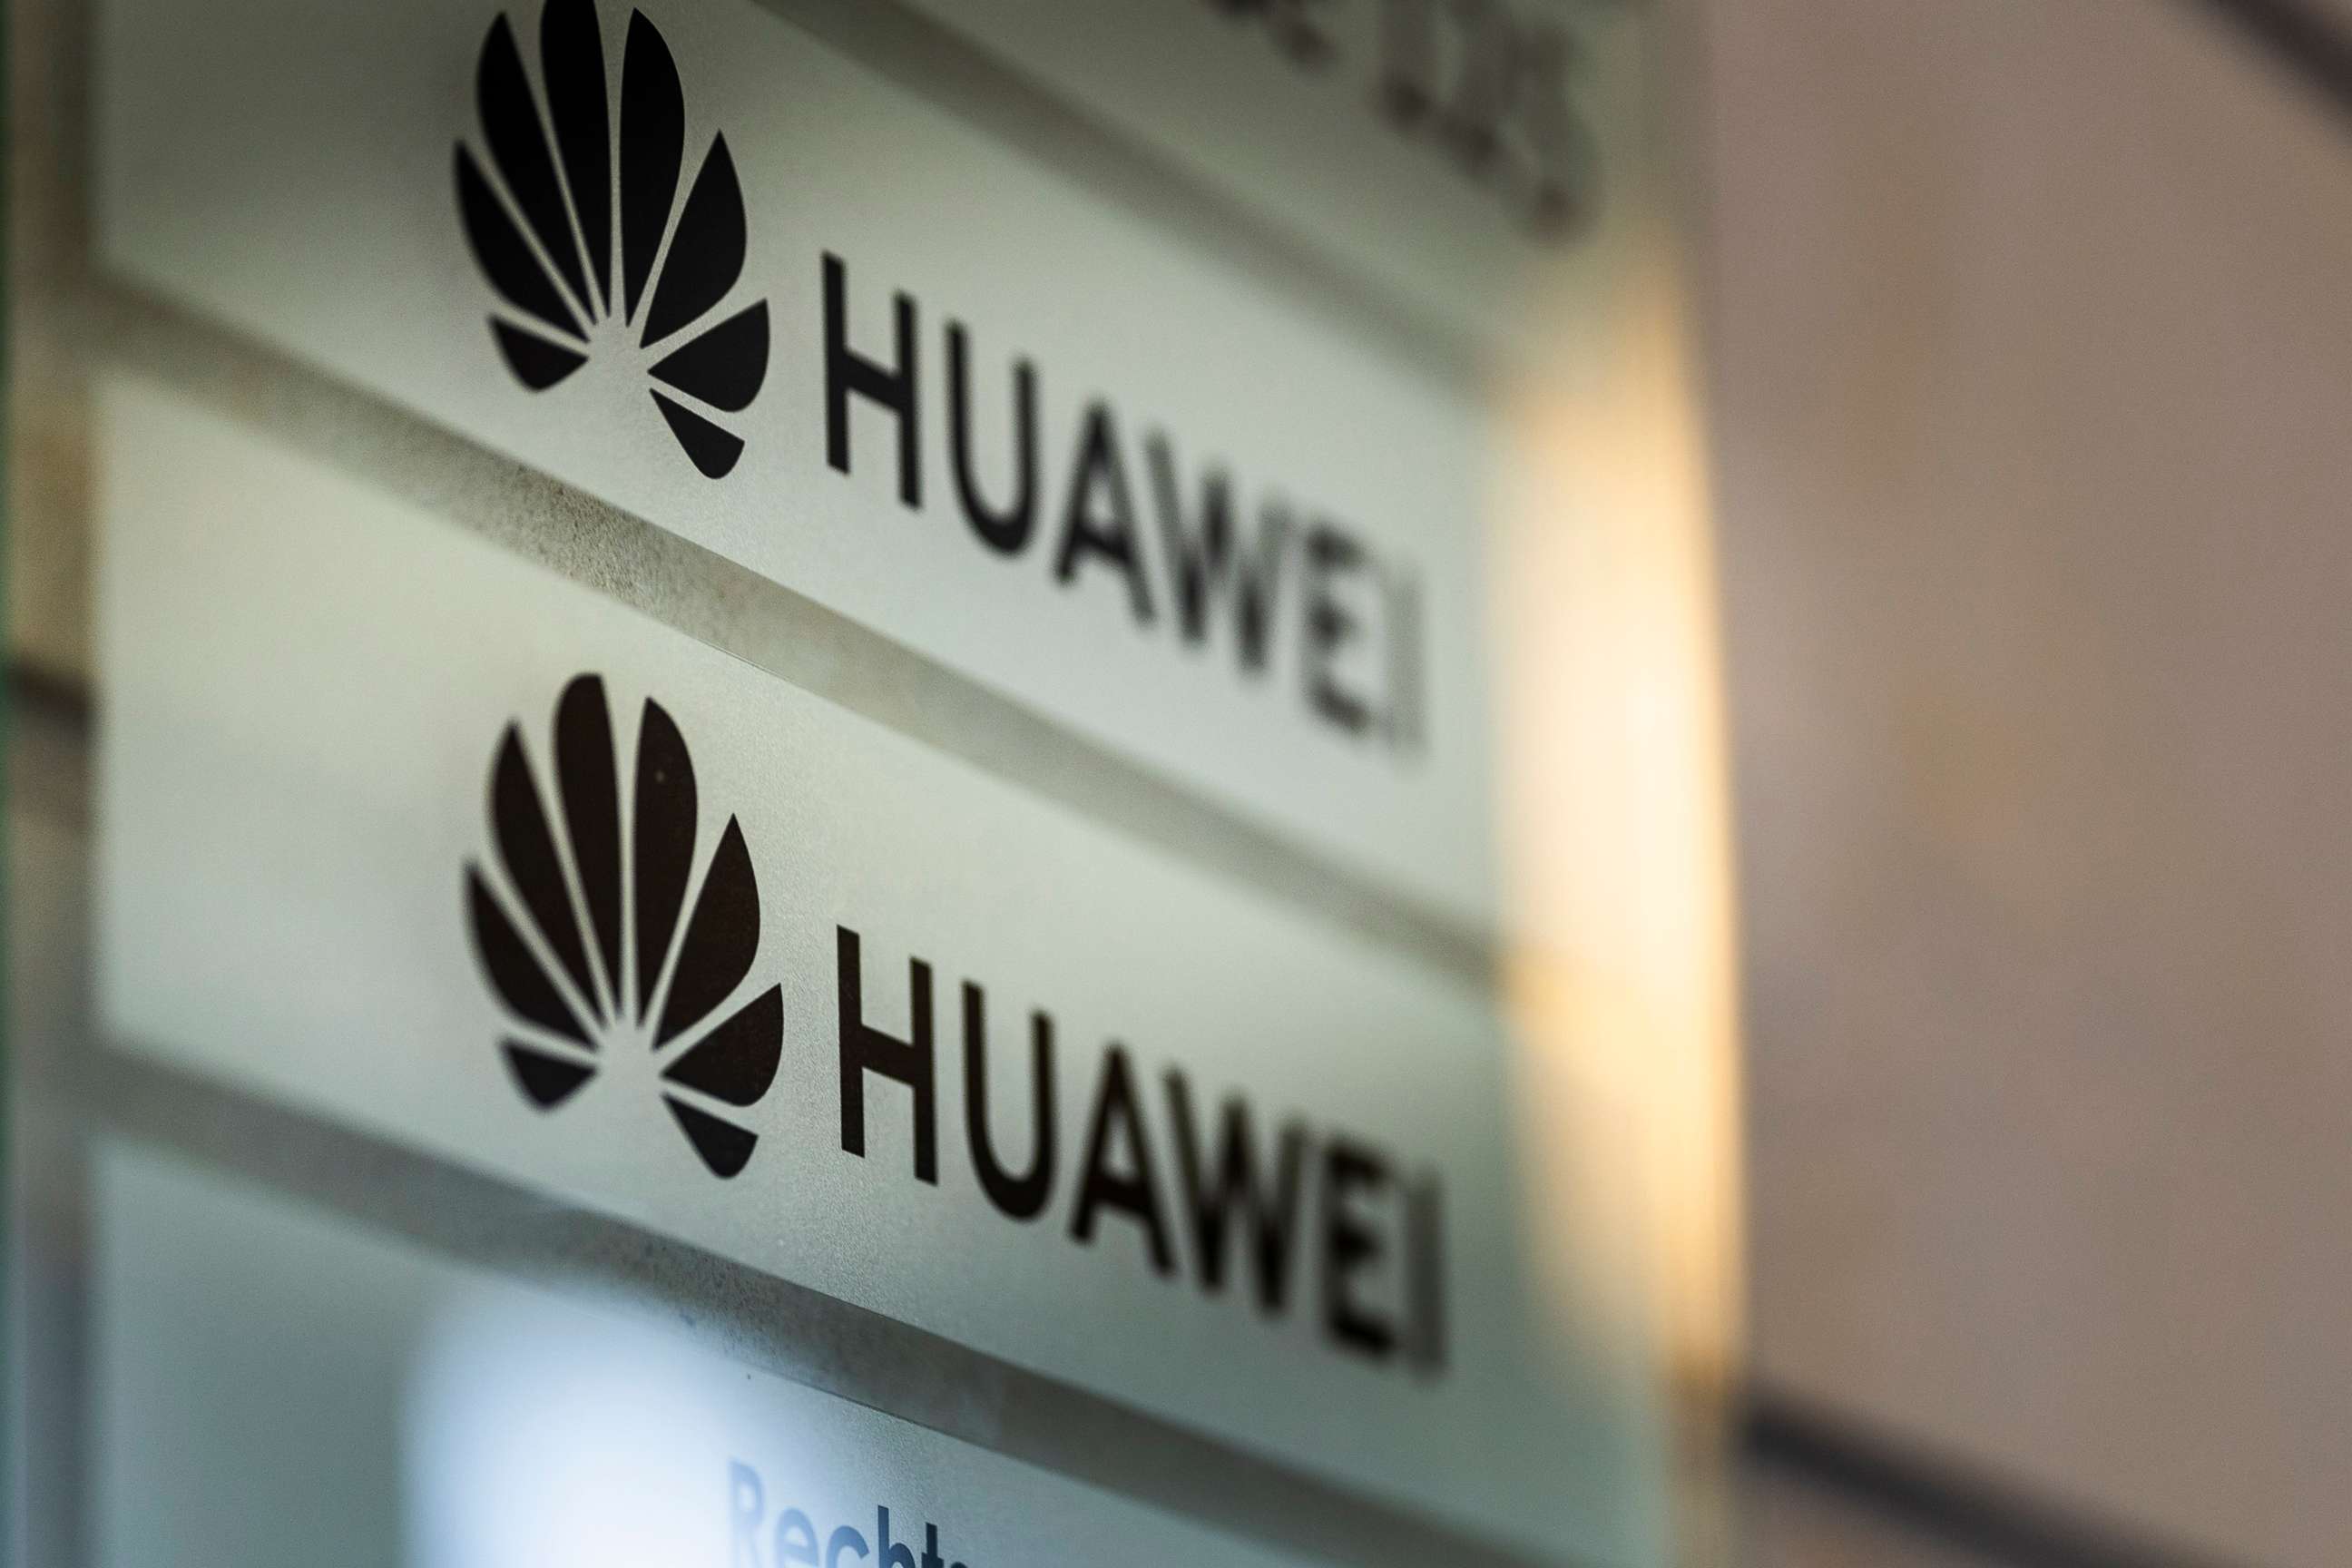 PHOTO: In this Feb. 2, 2022, file photo, the logo of the telecommunication provider Huawei is shown.